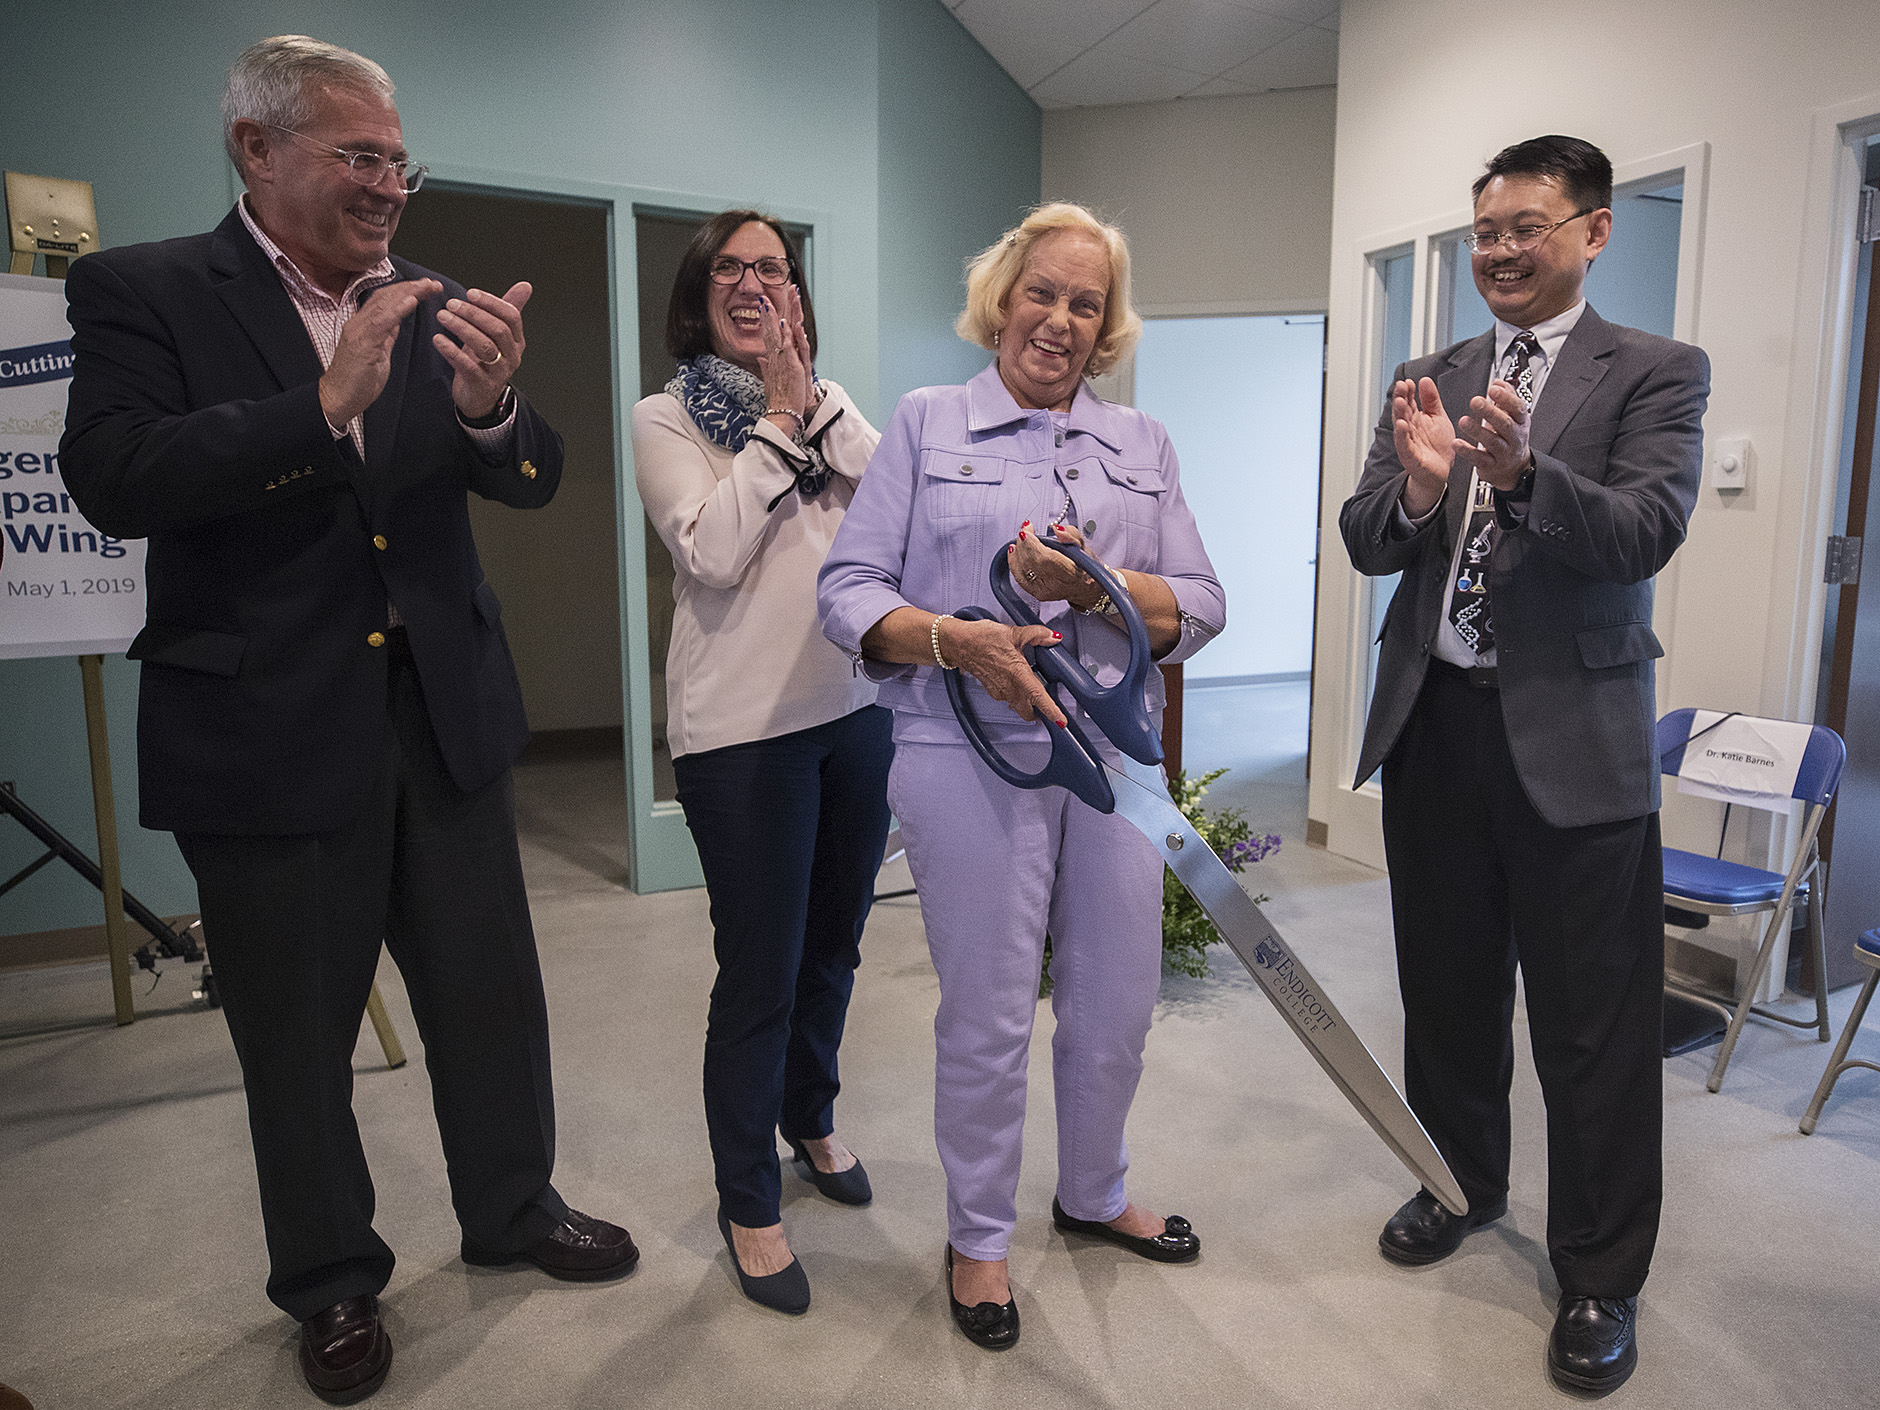 Ginger Judge cuts ribbon at new expansion of Judge Science Center; photo by David Le.